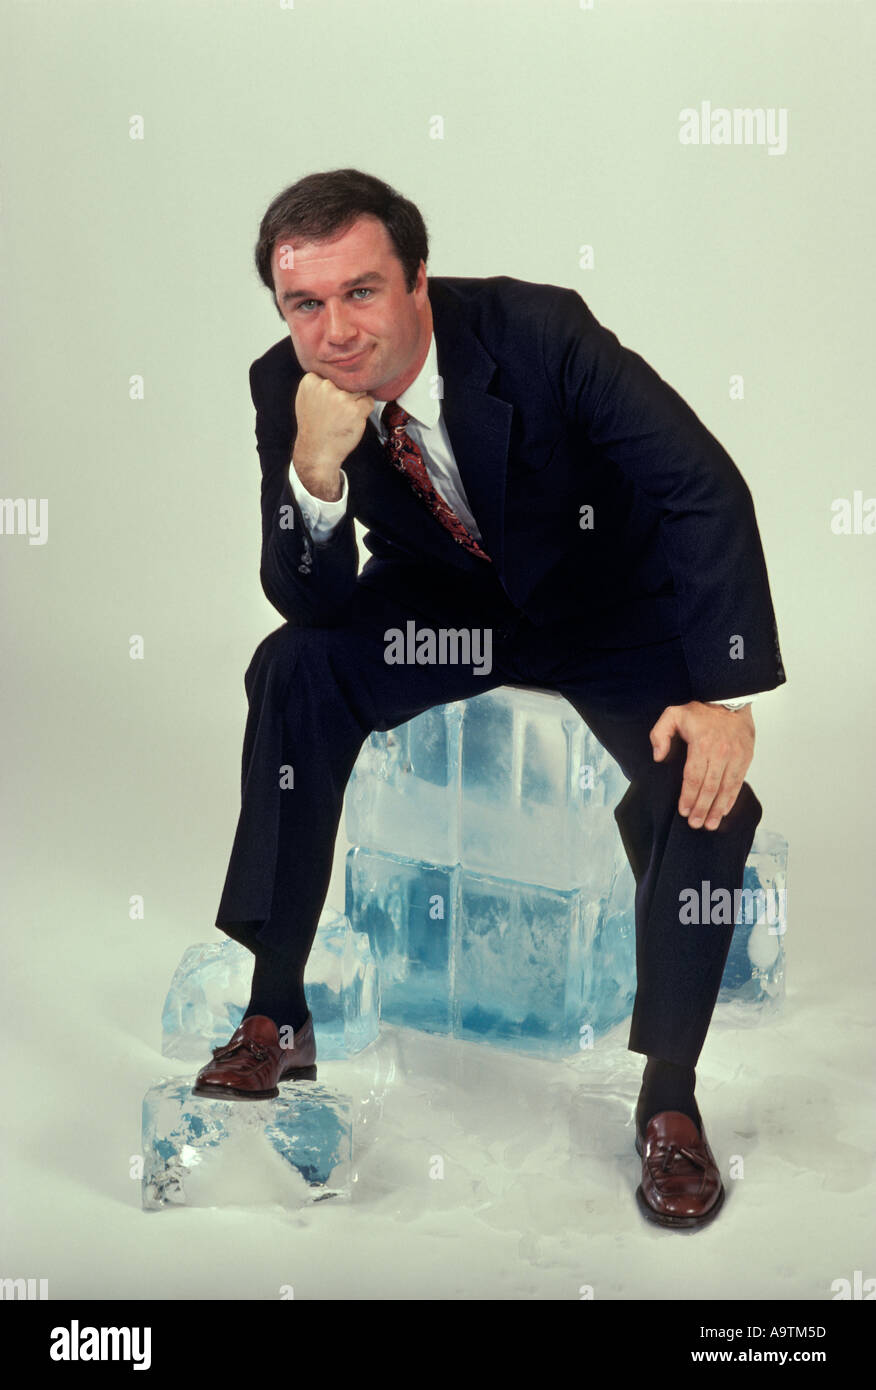 male-executive-sitting-on-block-of-ice-contemplating-copy-space-A9TM5D.jpg